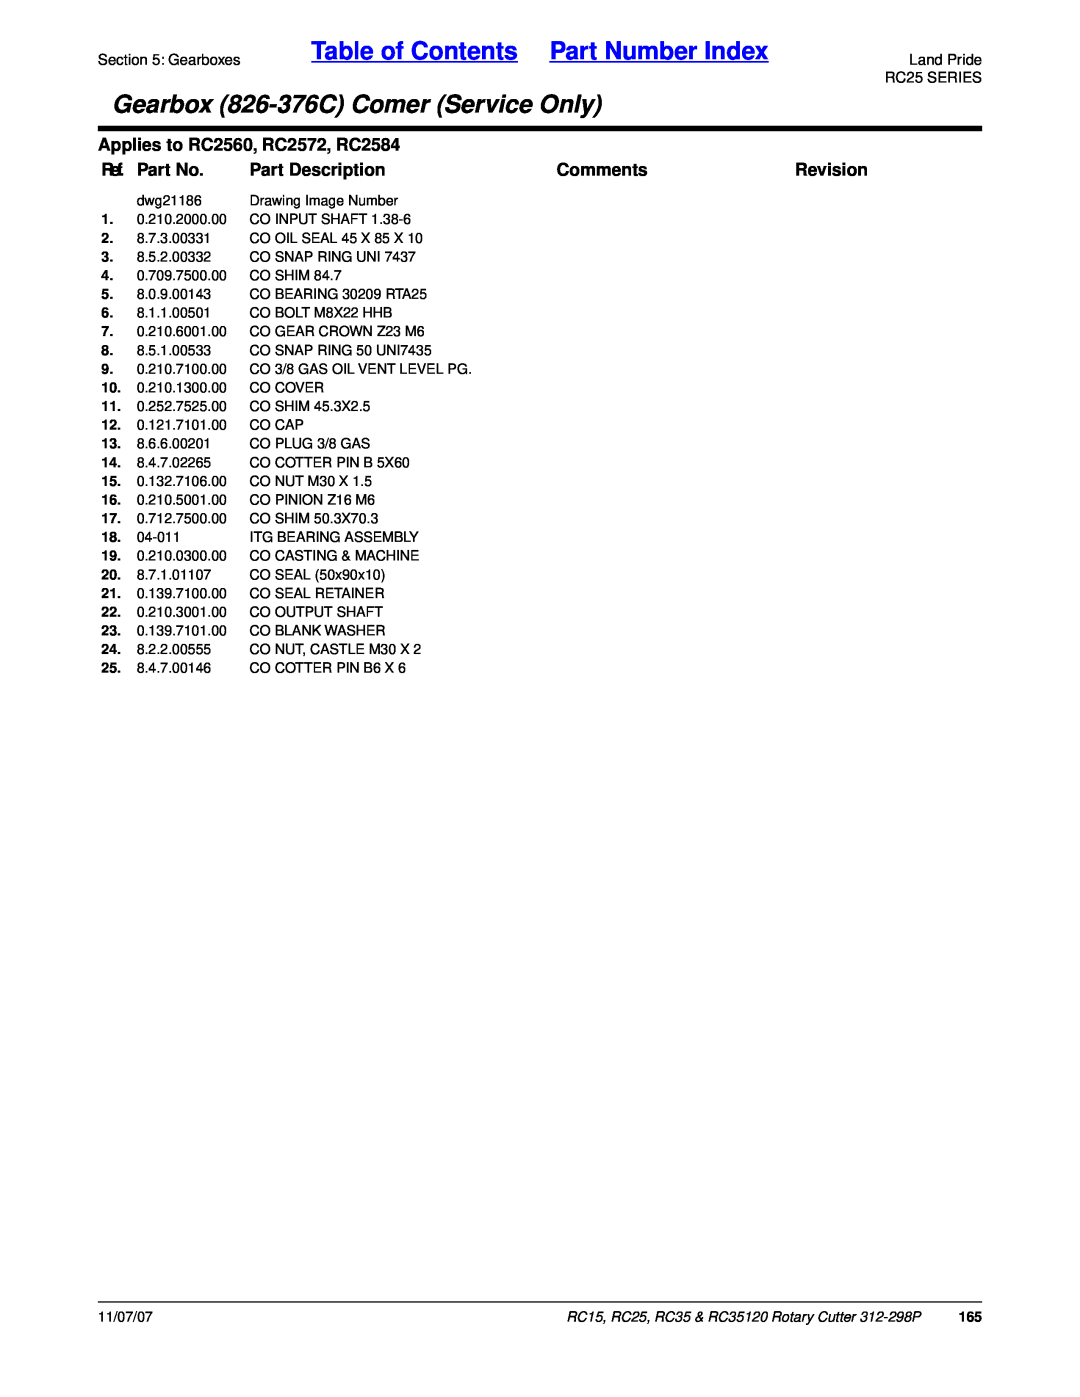 Land Pride RC35 Table of Contents Part Number Index, Gearbox 826-376CComer Service Only, Applies to RC2560, RC2572, RC2584 